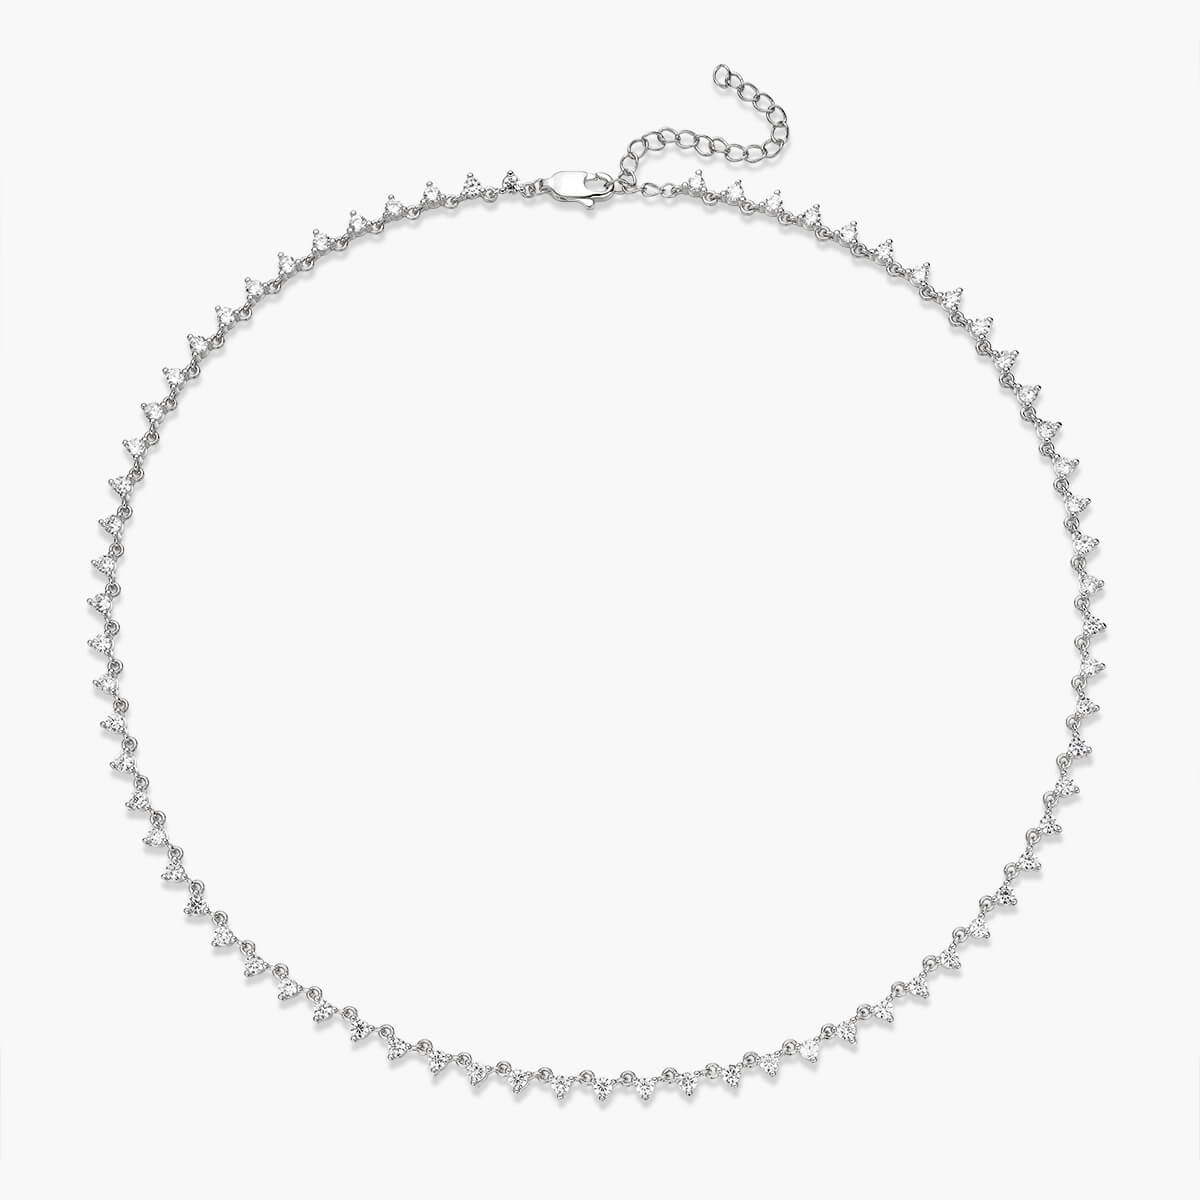 Rhinestone Choker Necklaces Silver Crystal Cz Necklaces Sparkling Diamond Choker  Necklaces Thin Crystal Collar Necklaces Jewelry For Women And Girls(f